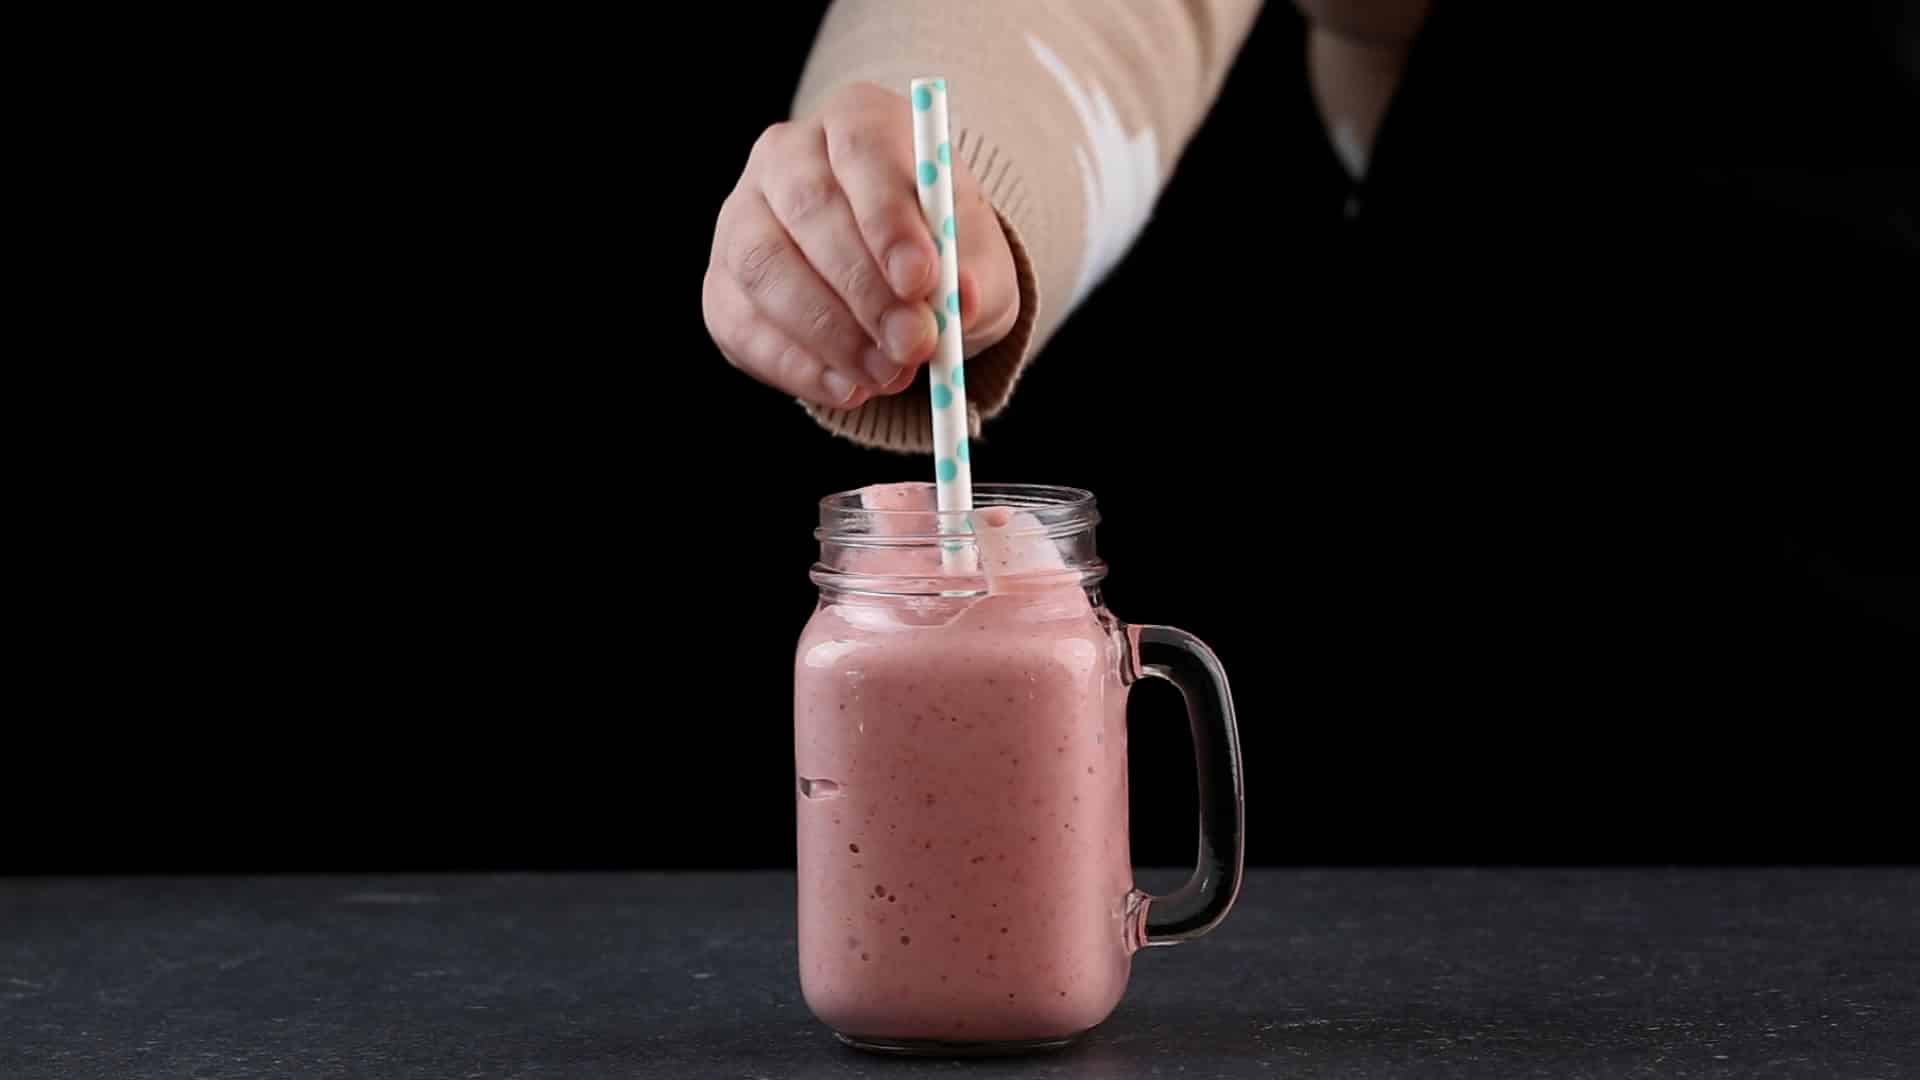 A hand adding a straw in a glass jar of smoothie.